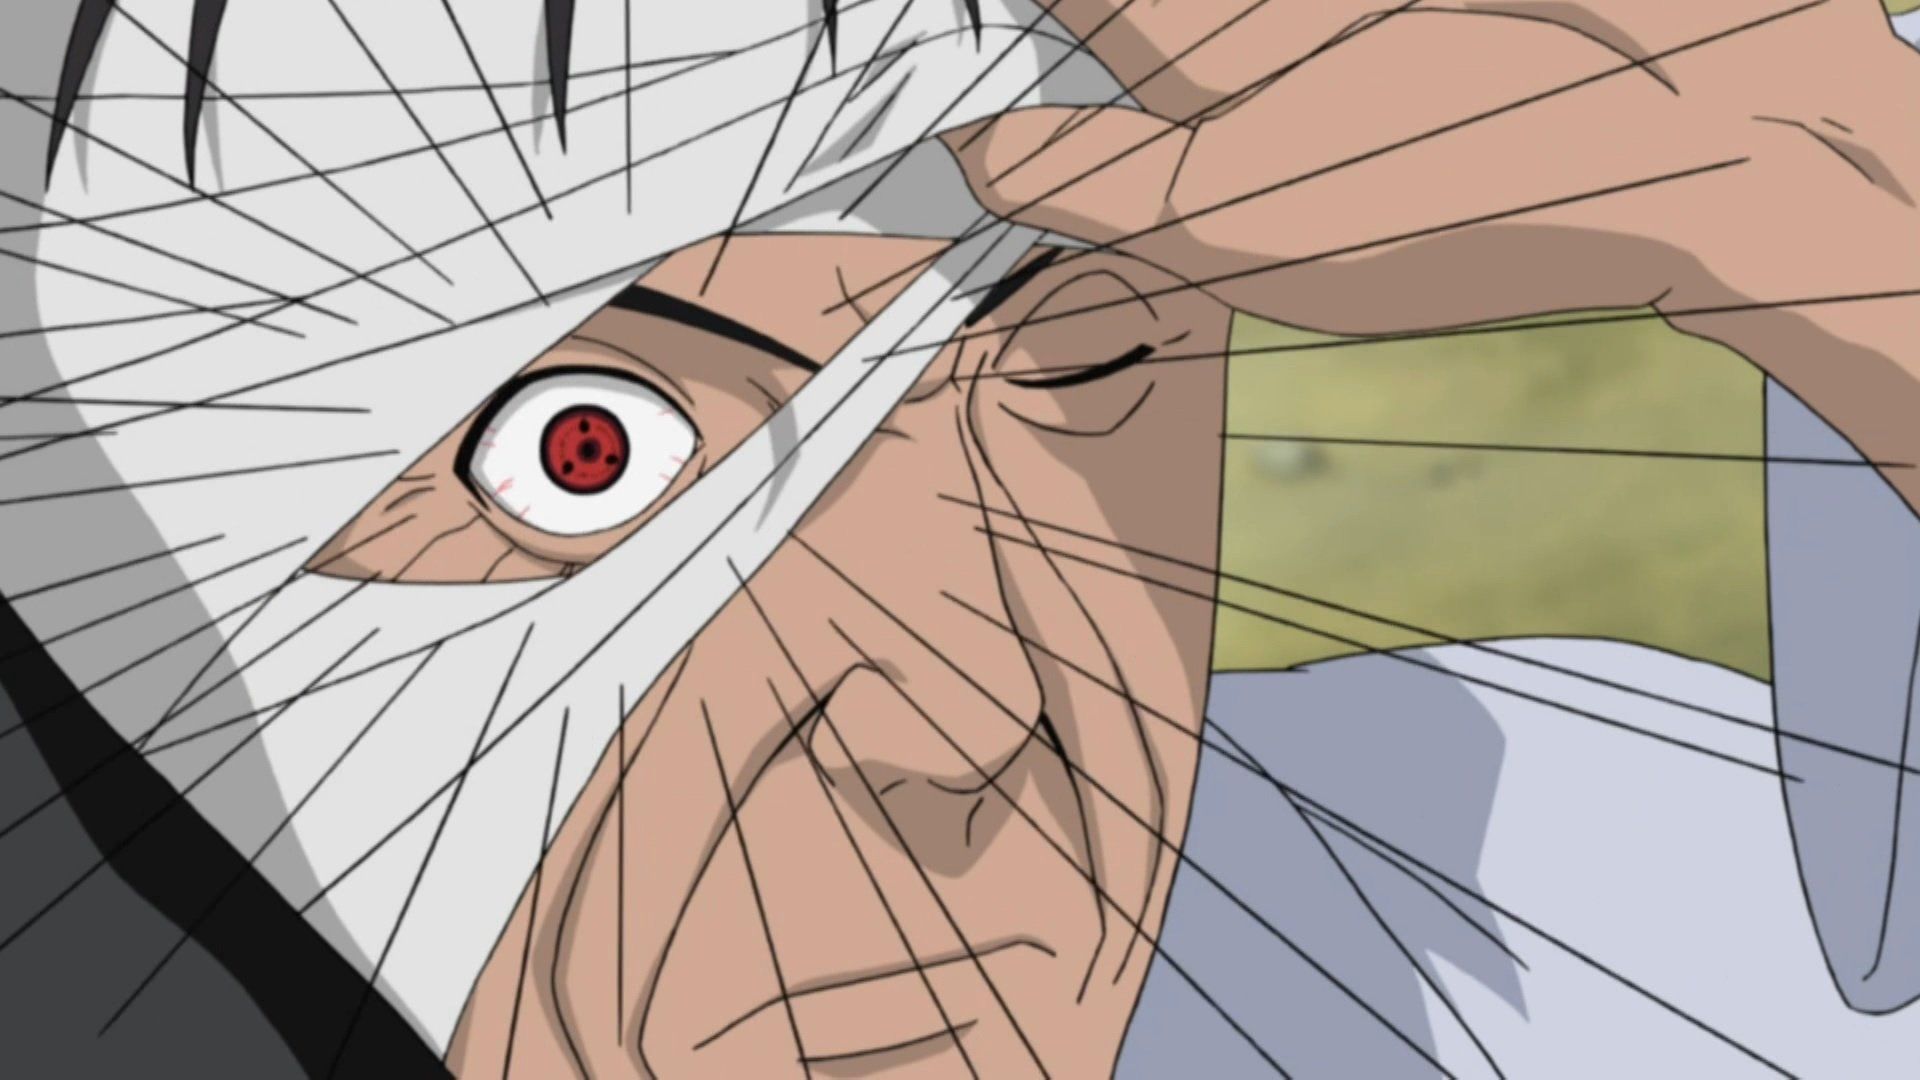 Perceive why Danzo Shimura by no means tried to steal Kakashi’s Sharingan in Naruto